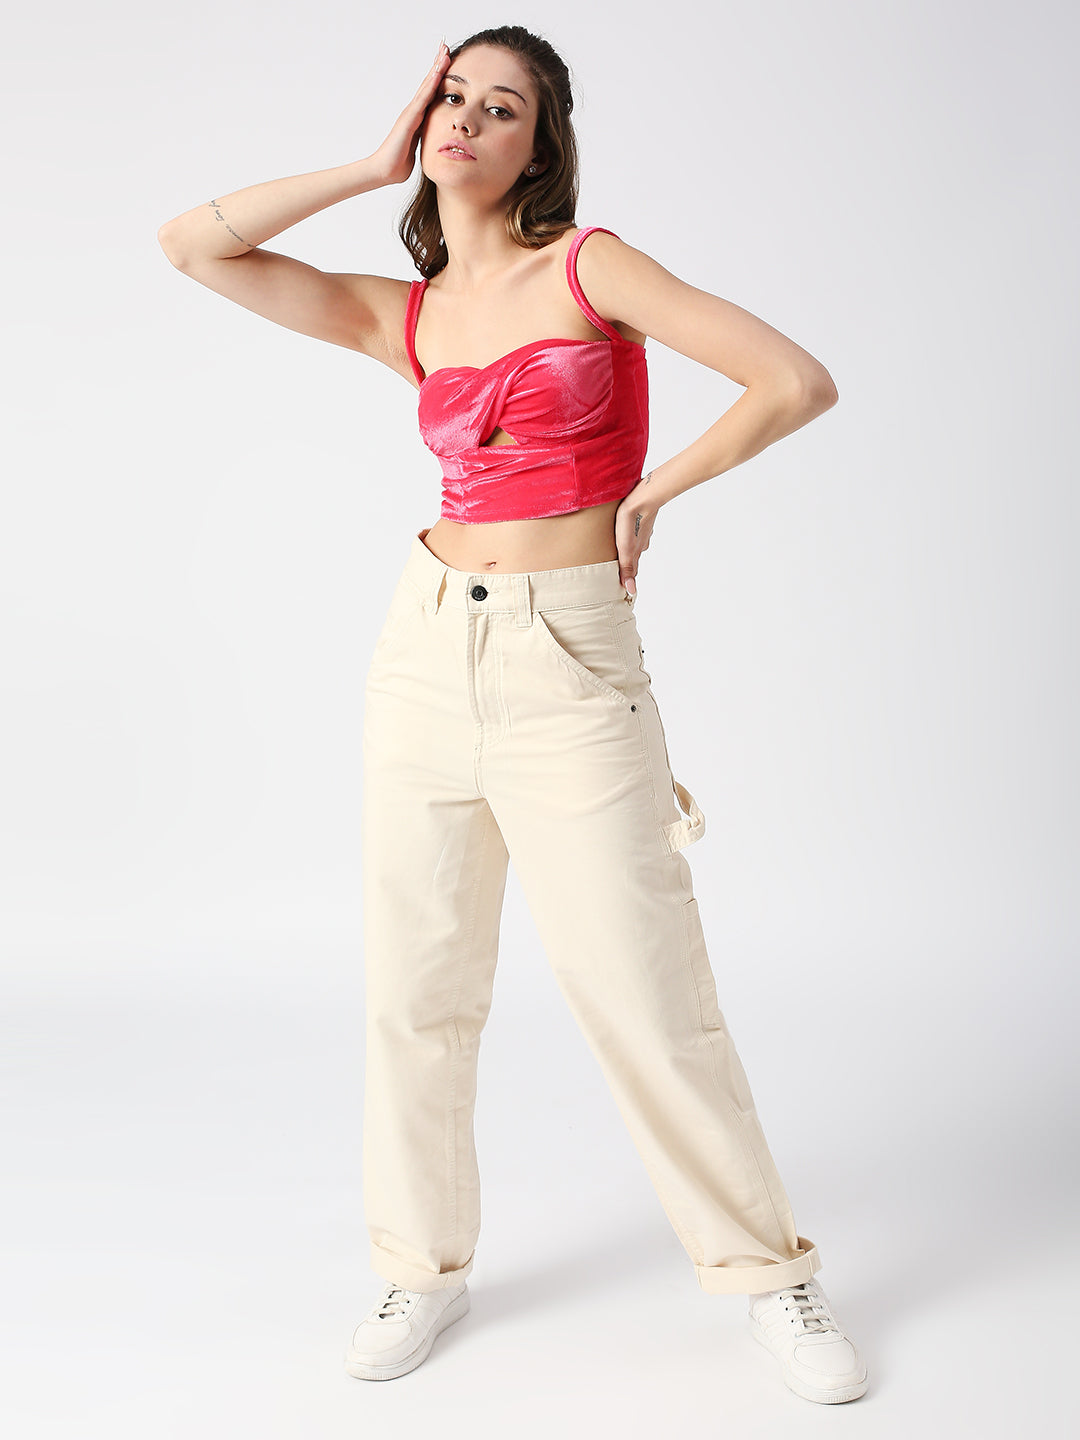 DISRUPT WOMEN PINK VELVET STRAPPY SLIM FIT TWISTED CROP TOP WITH CUPS